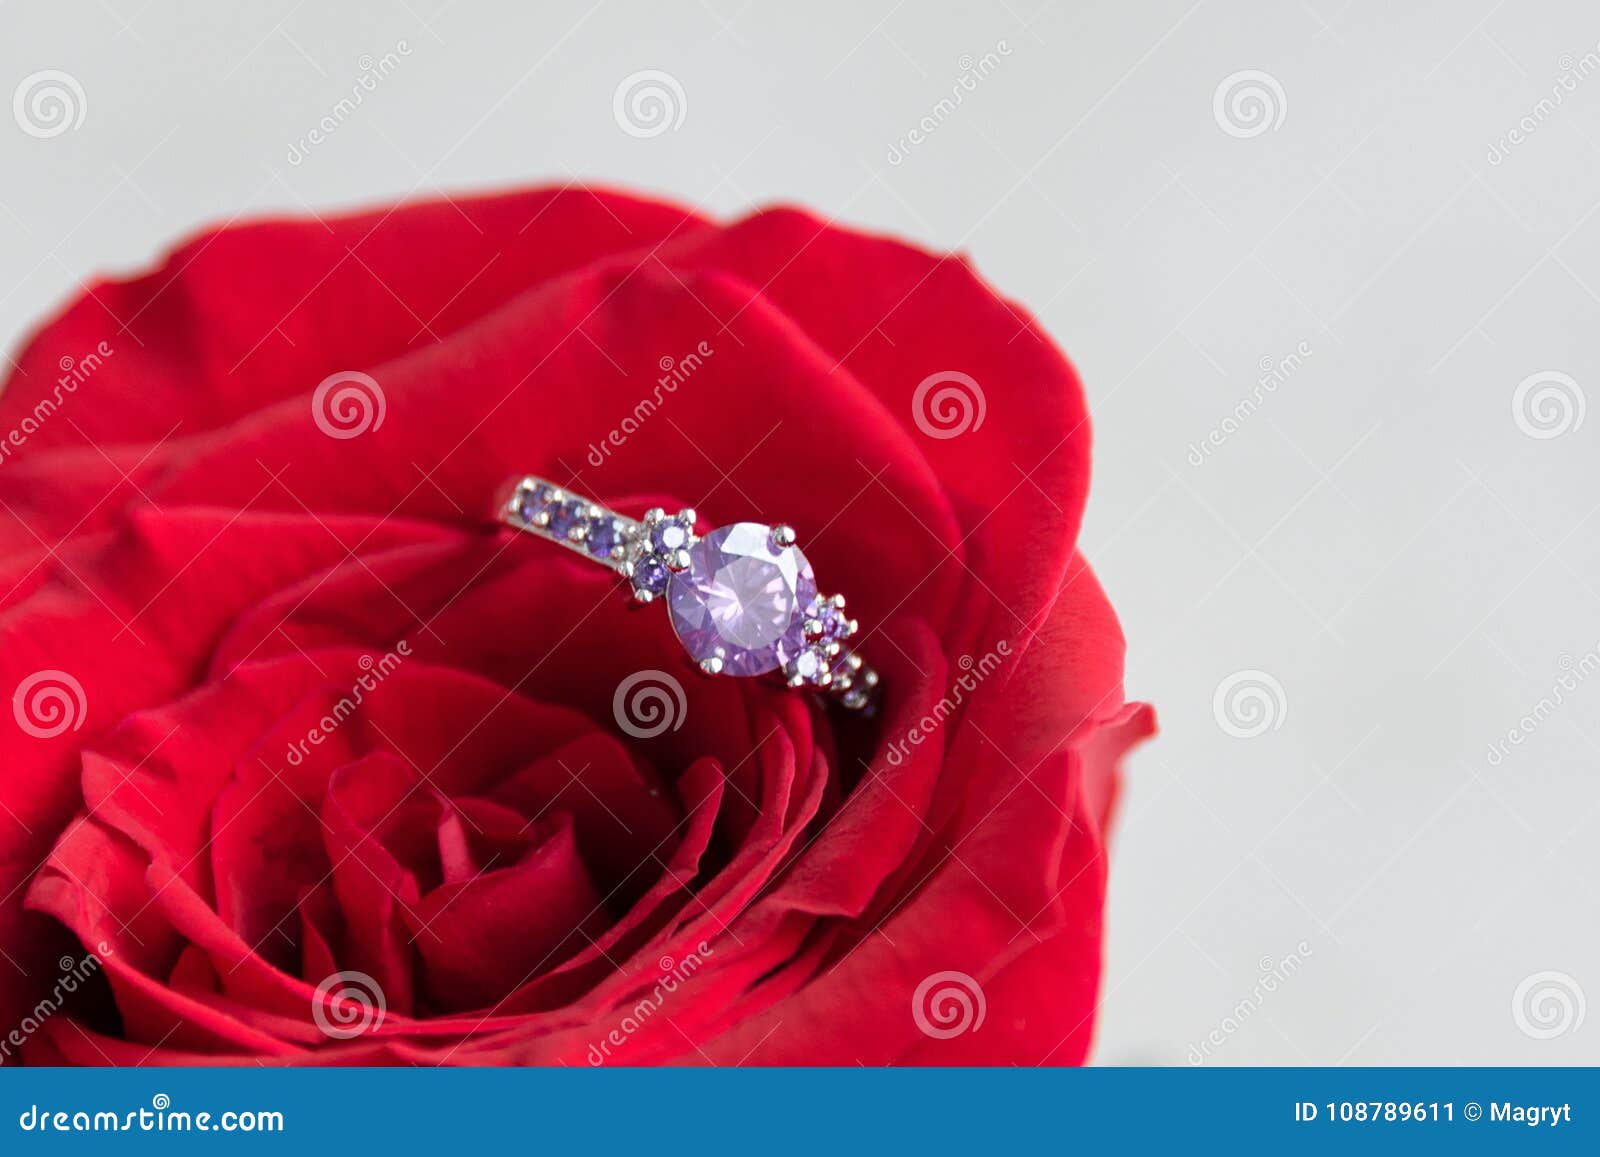 Sparkling Engagement Ring Inside Red Rose. Romantic Gift for Valentines  Day. Marriage Proposal Concept. Stock Photo - Image of romantic, deep:  108706120